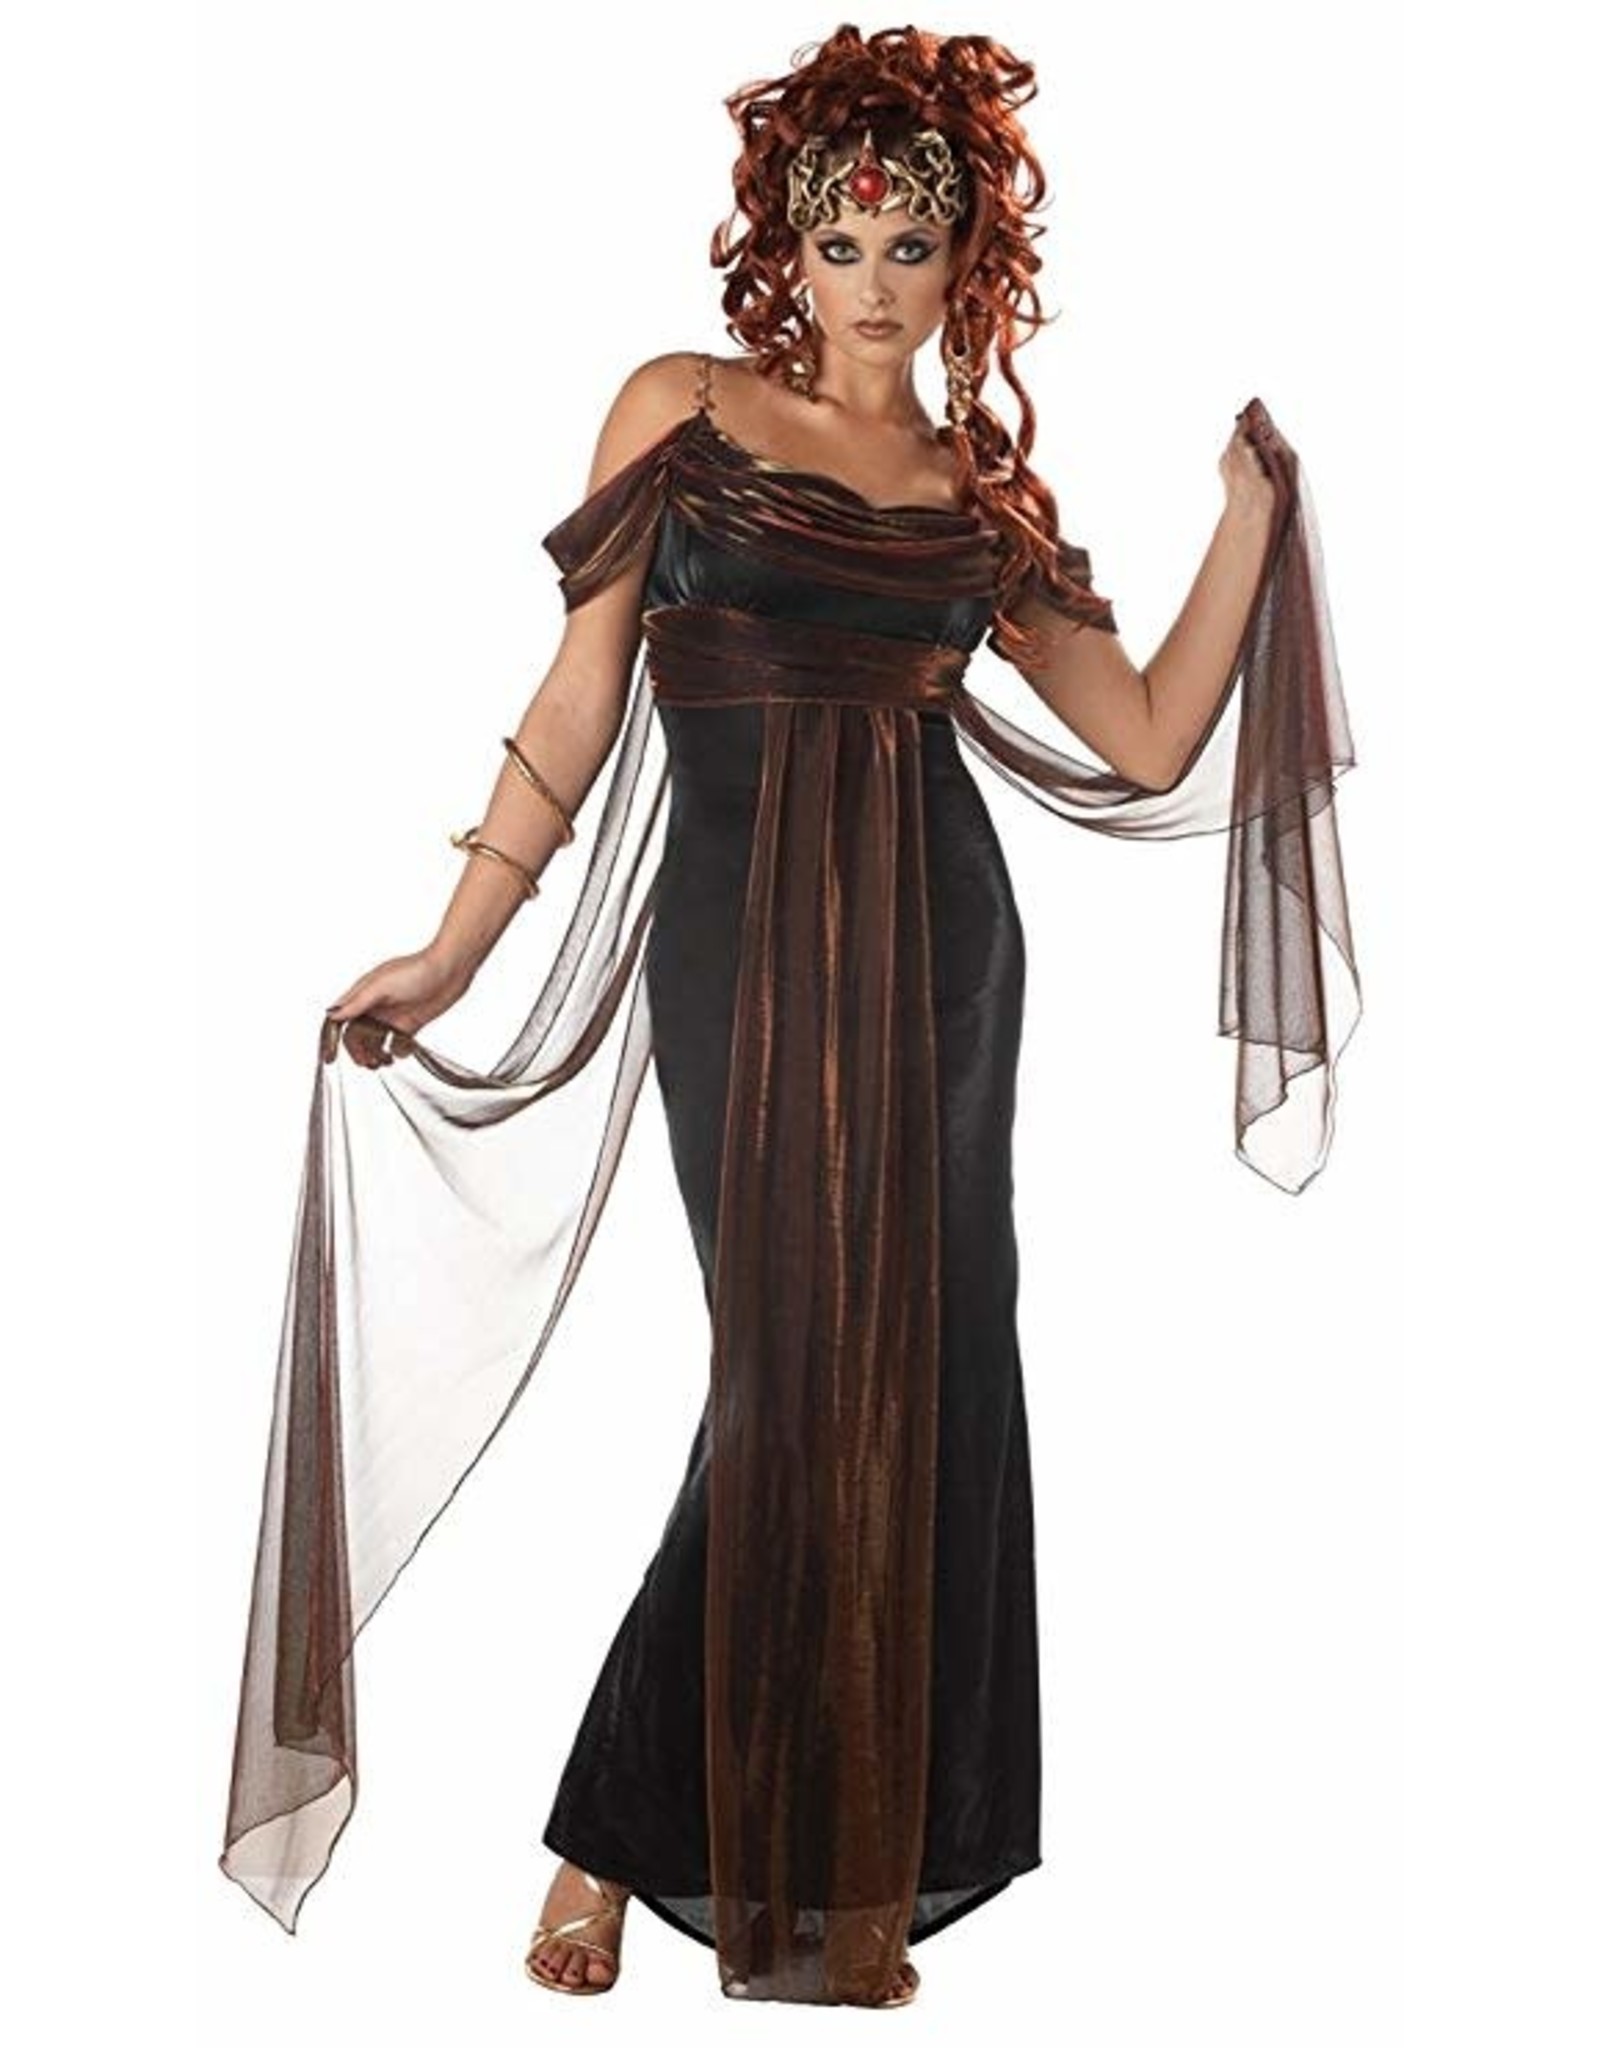 California Costume Collections Medusa The Mythical Siren, Red/Green, Osfm - One Size Fits Most